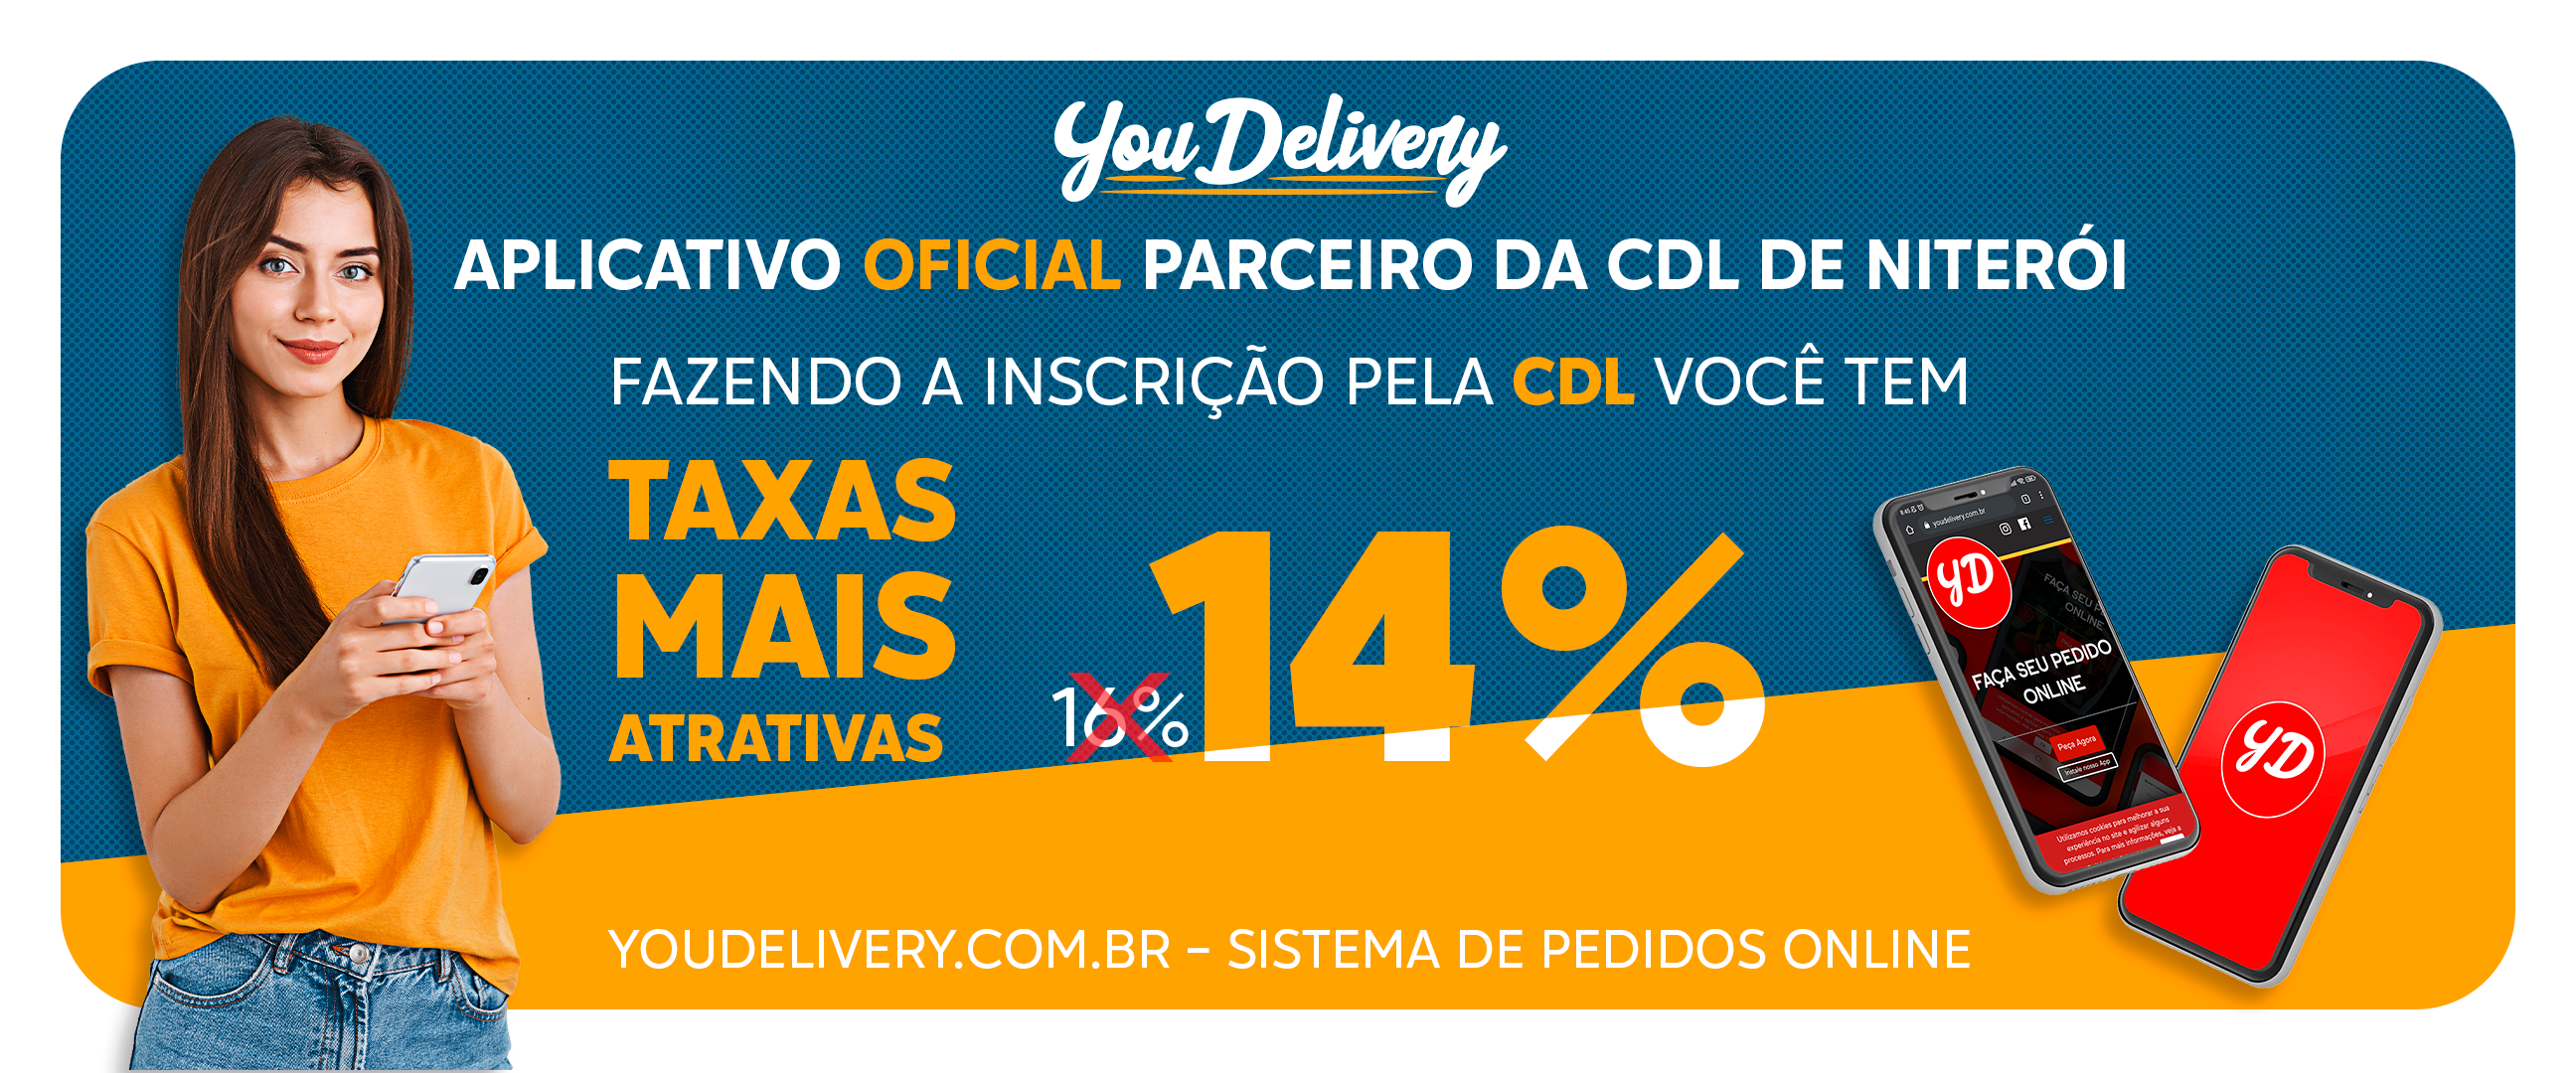 YOUDELIVERY